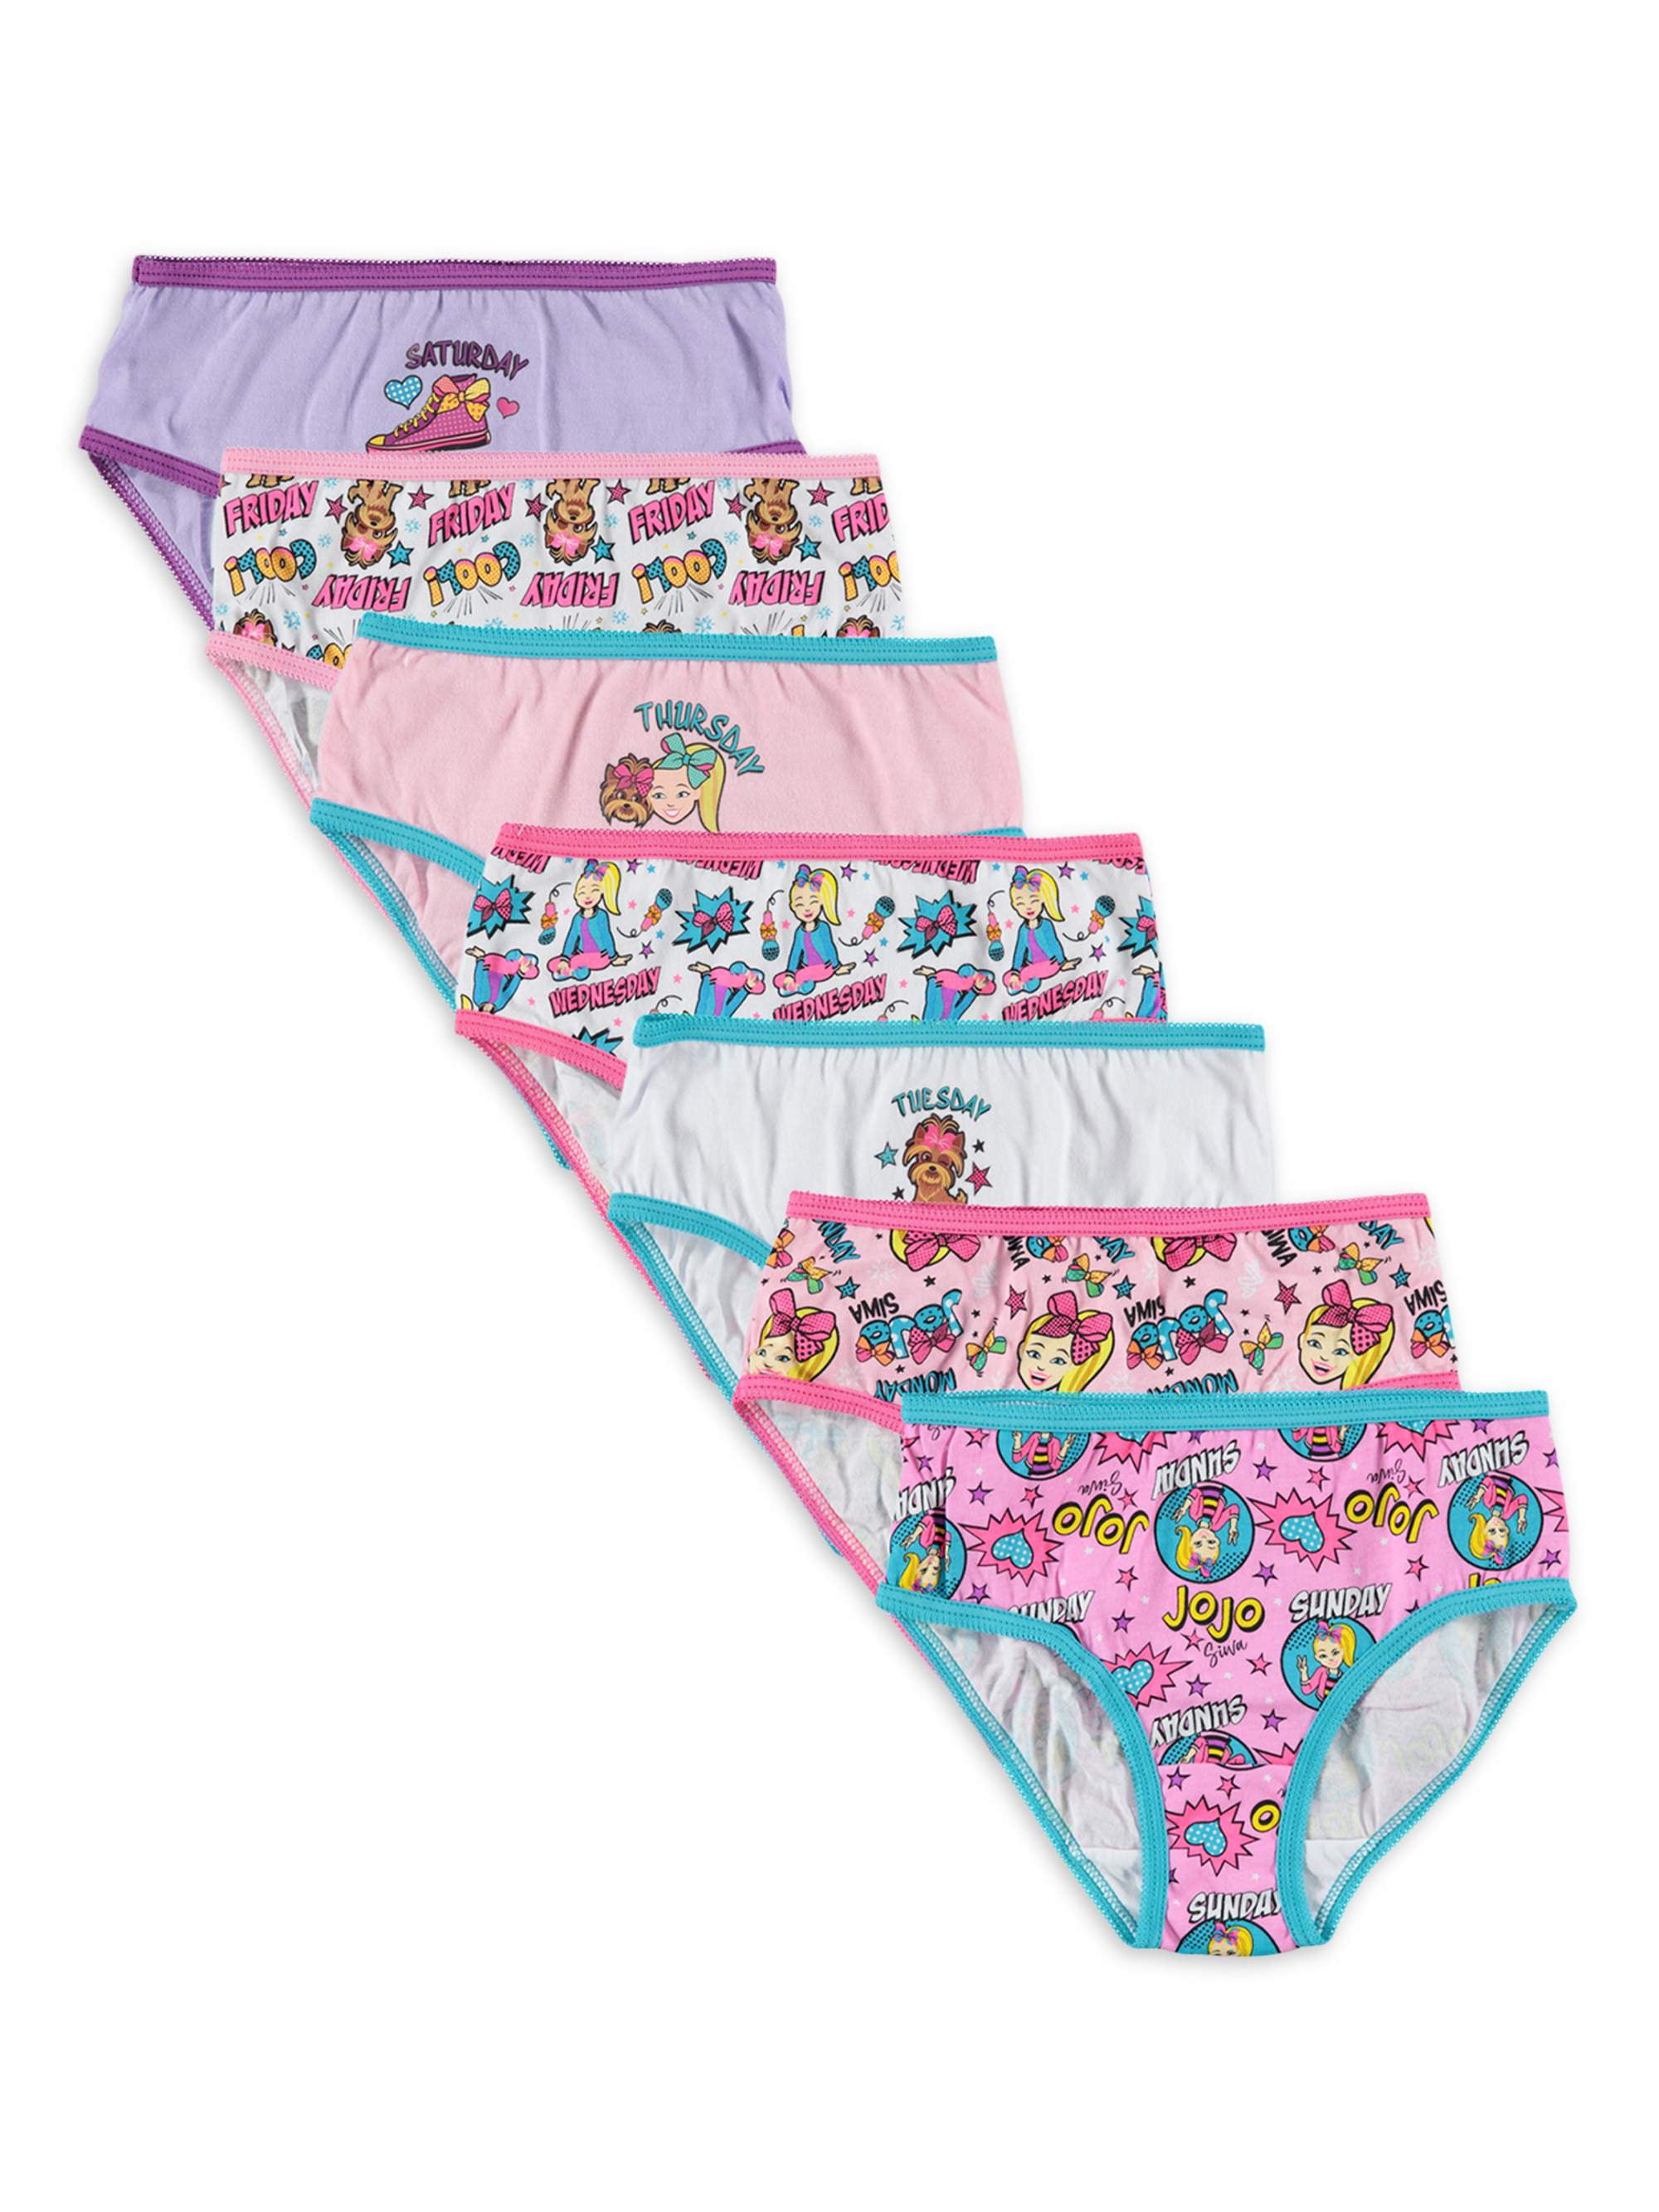 Adorable Days of the Week Panties & Storage Garment Bag for Your American  Girl Dolls -  Canada